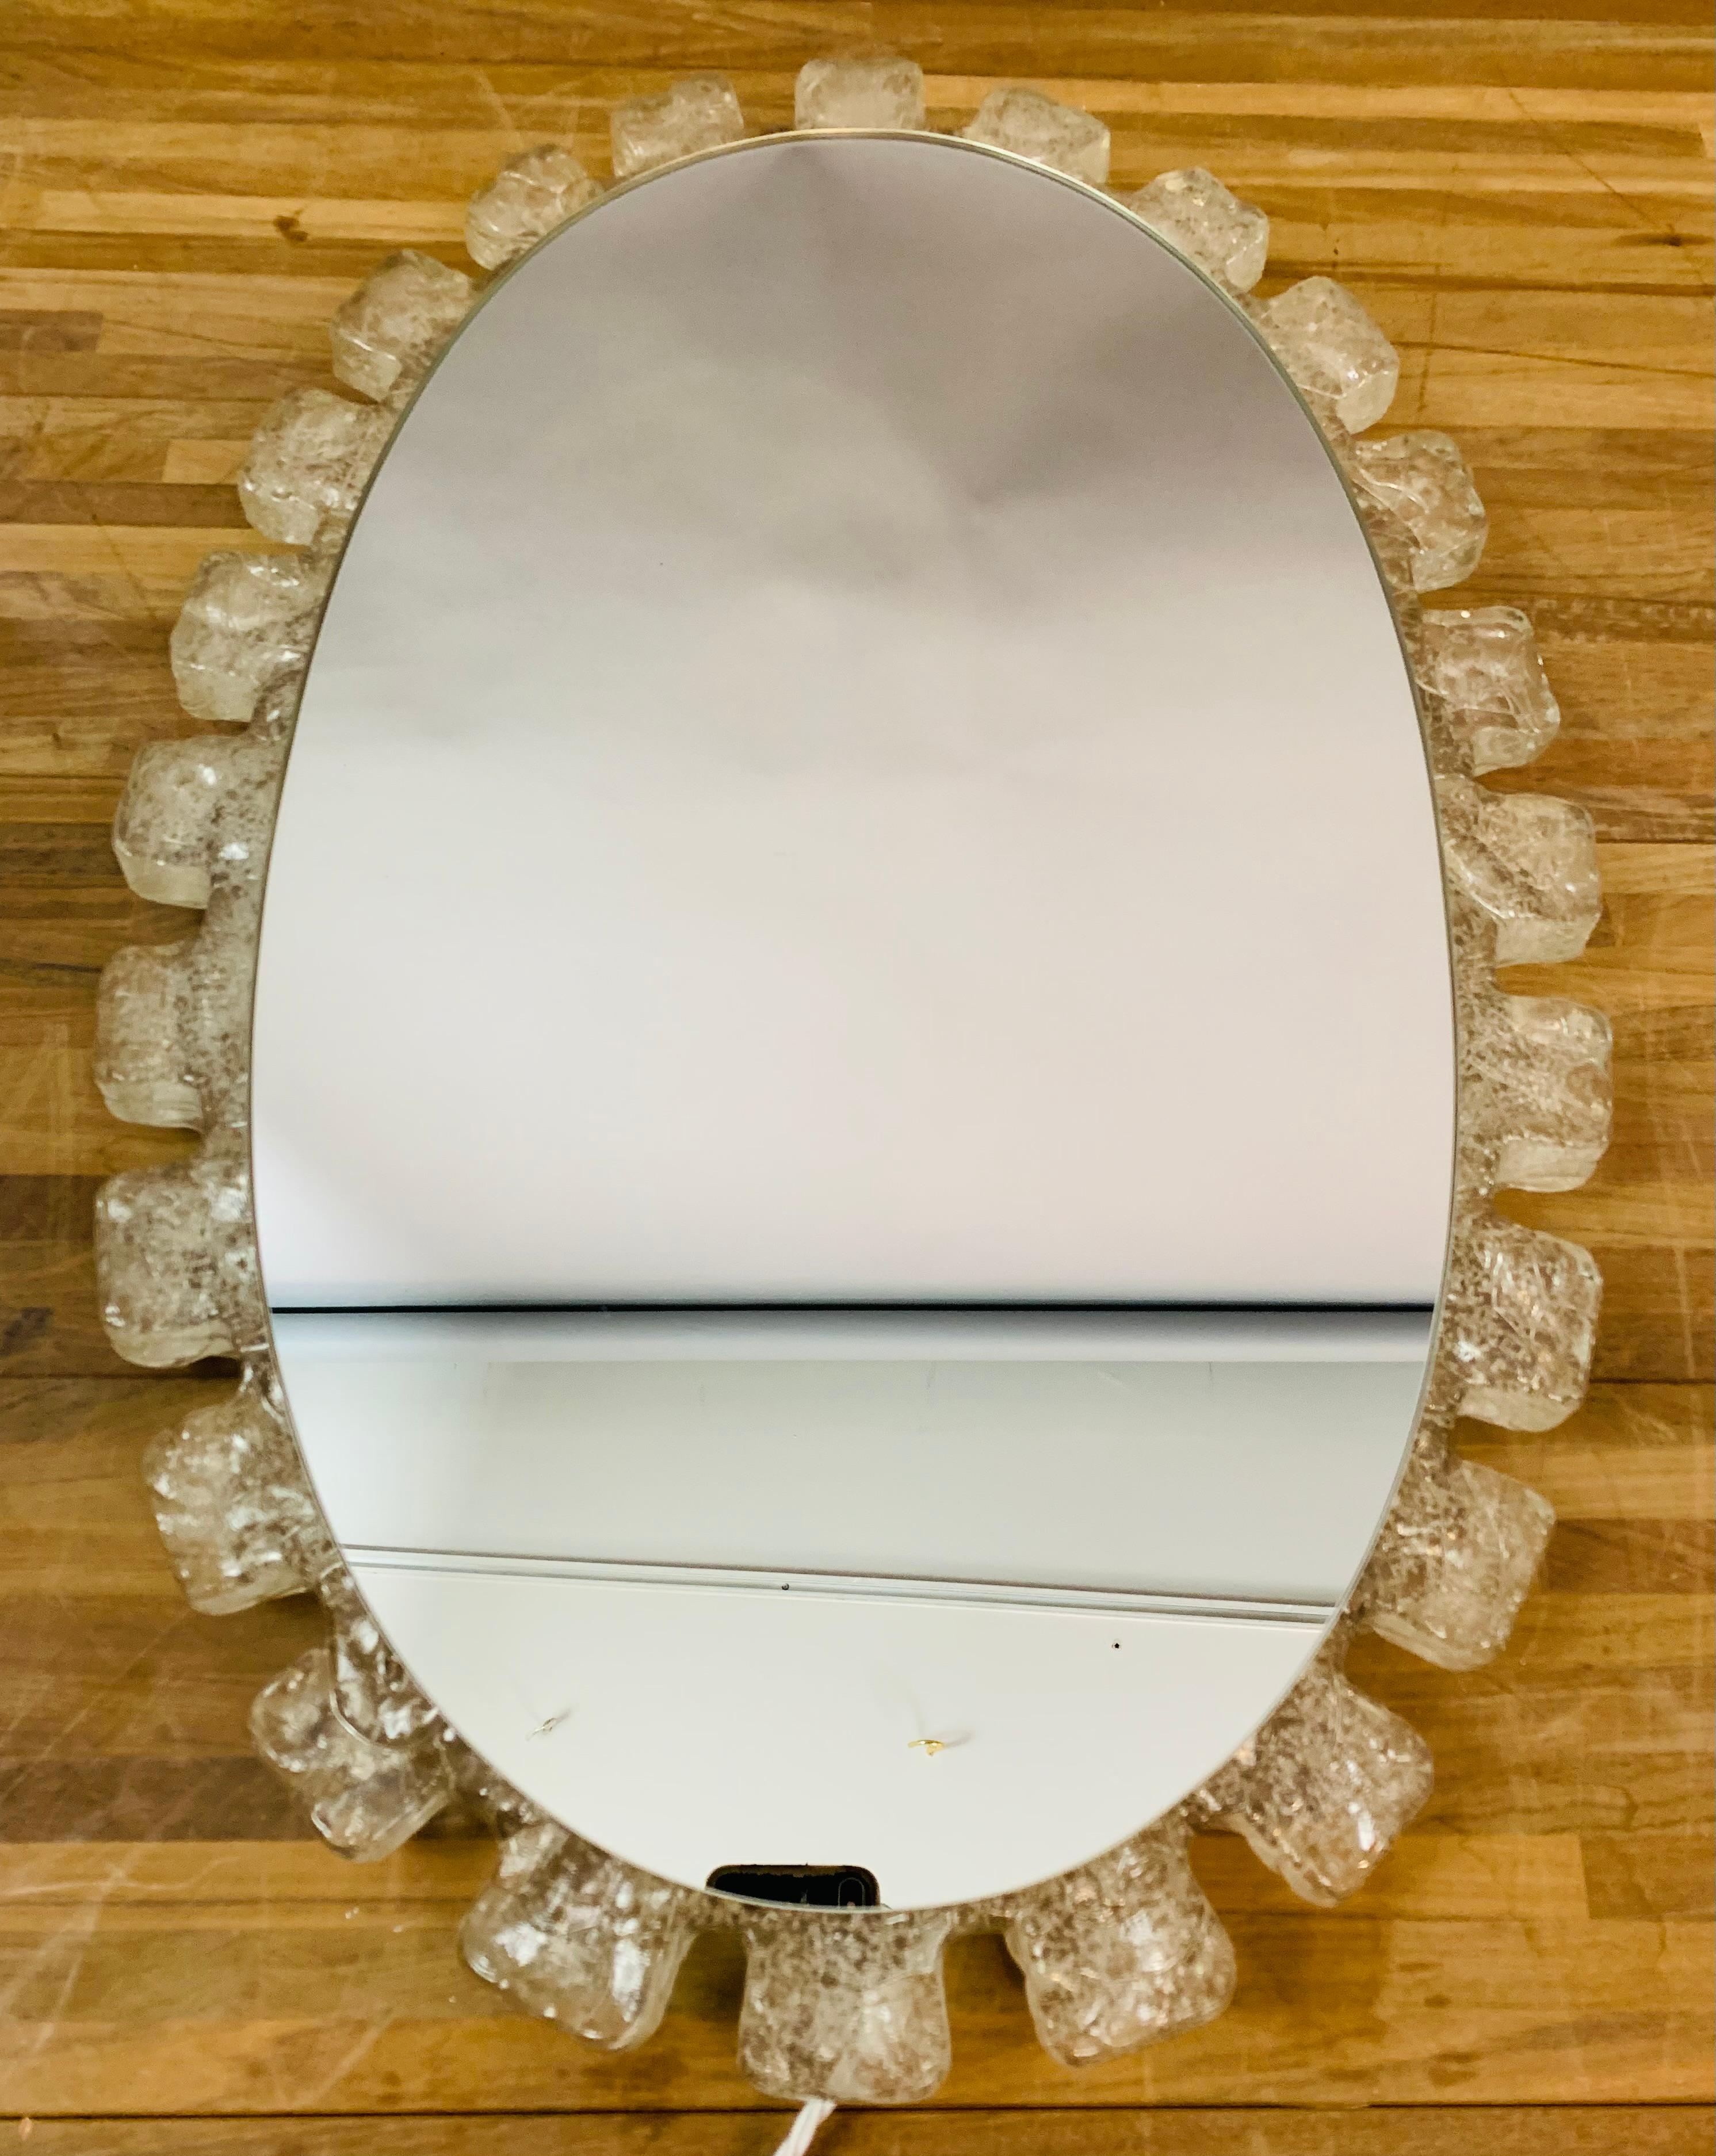 1970s Vintage German Illuminated Hillebrand Lucite Iced Frosted Oval Wall Mirror 4